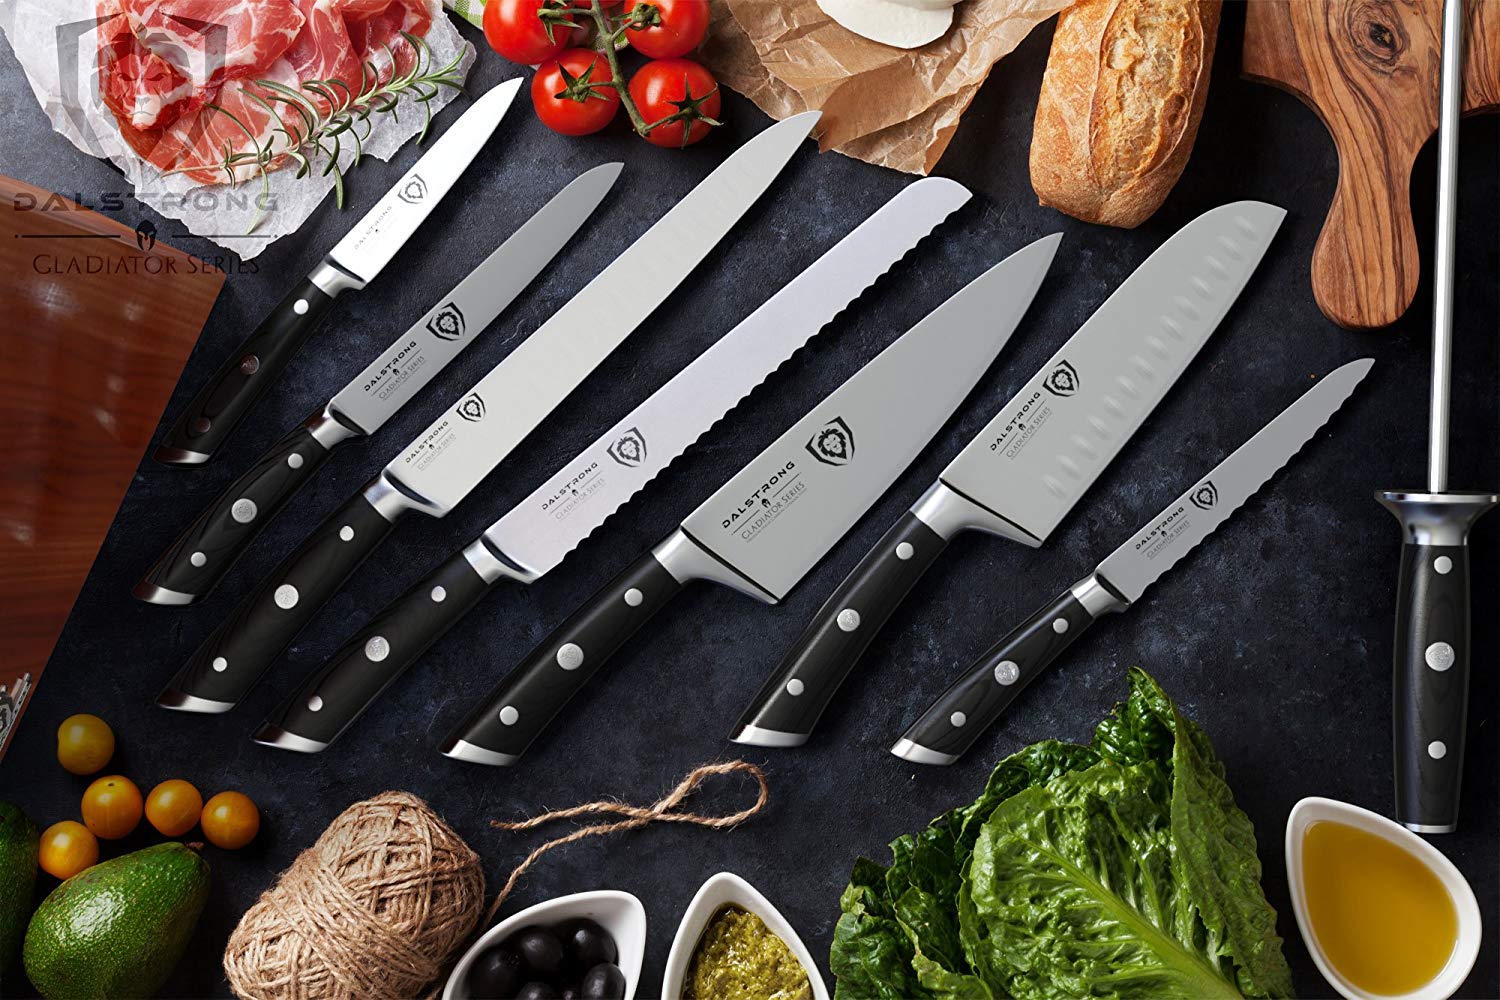 Top 10 Best Kitchen Knife Sets in 2020 Reviews Buyer's Guide